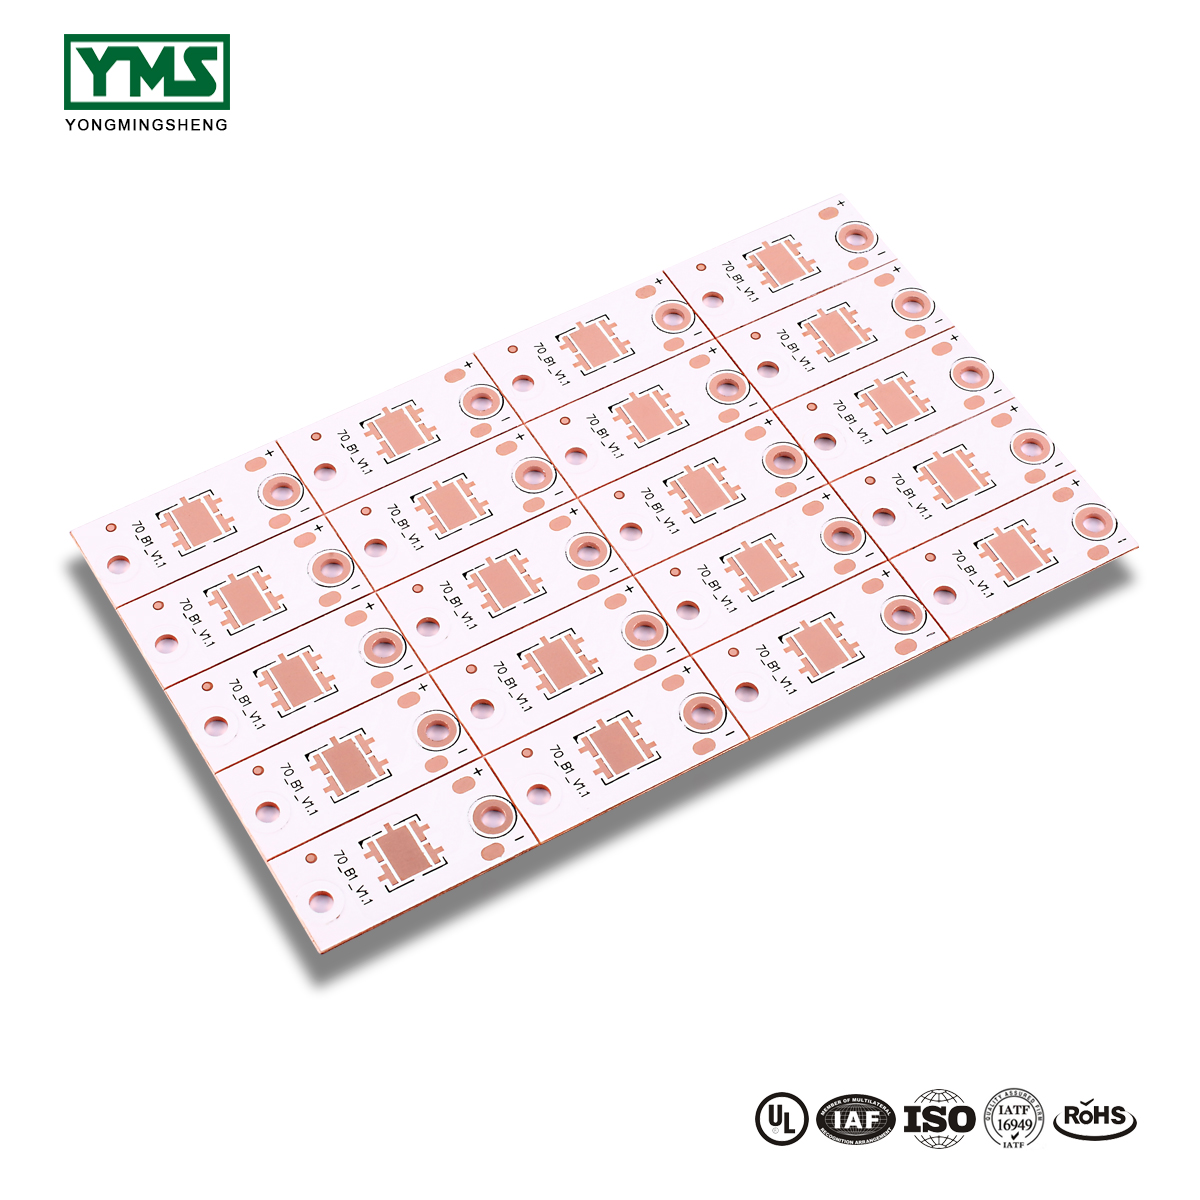 Wholesale Dealers of Thick Gold Fpc - 1Layer Thermoelectric Copper base Board | YMSPCB – Yongmingsheng